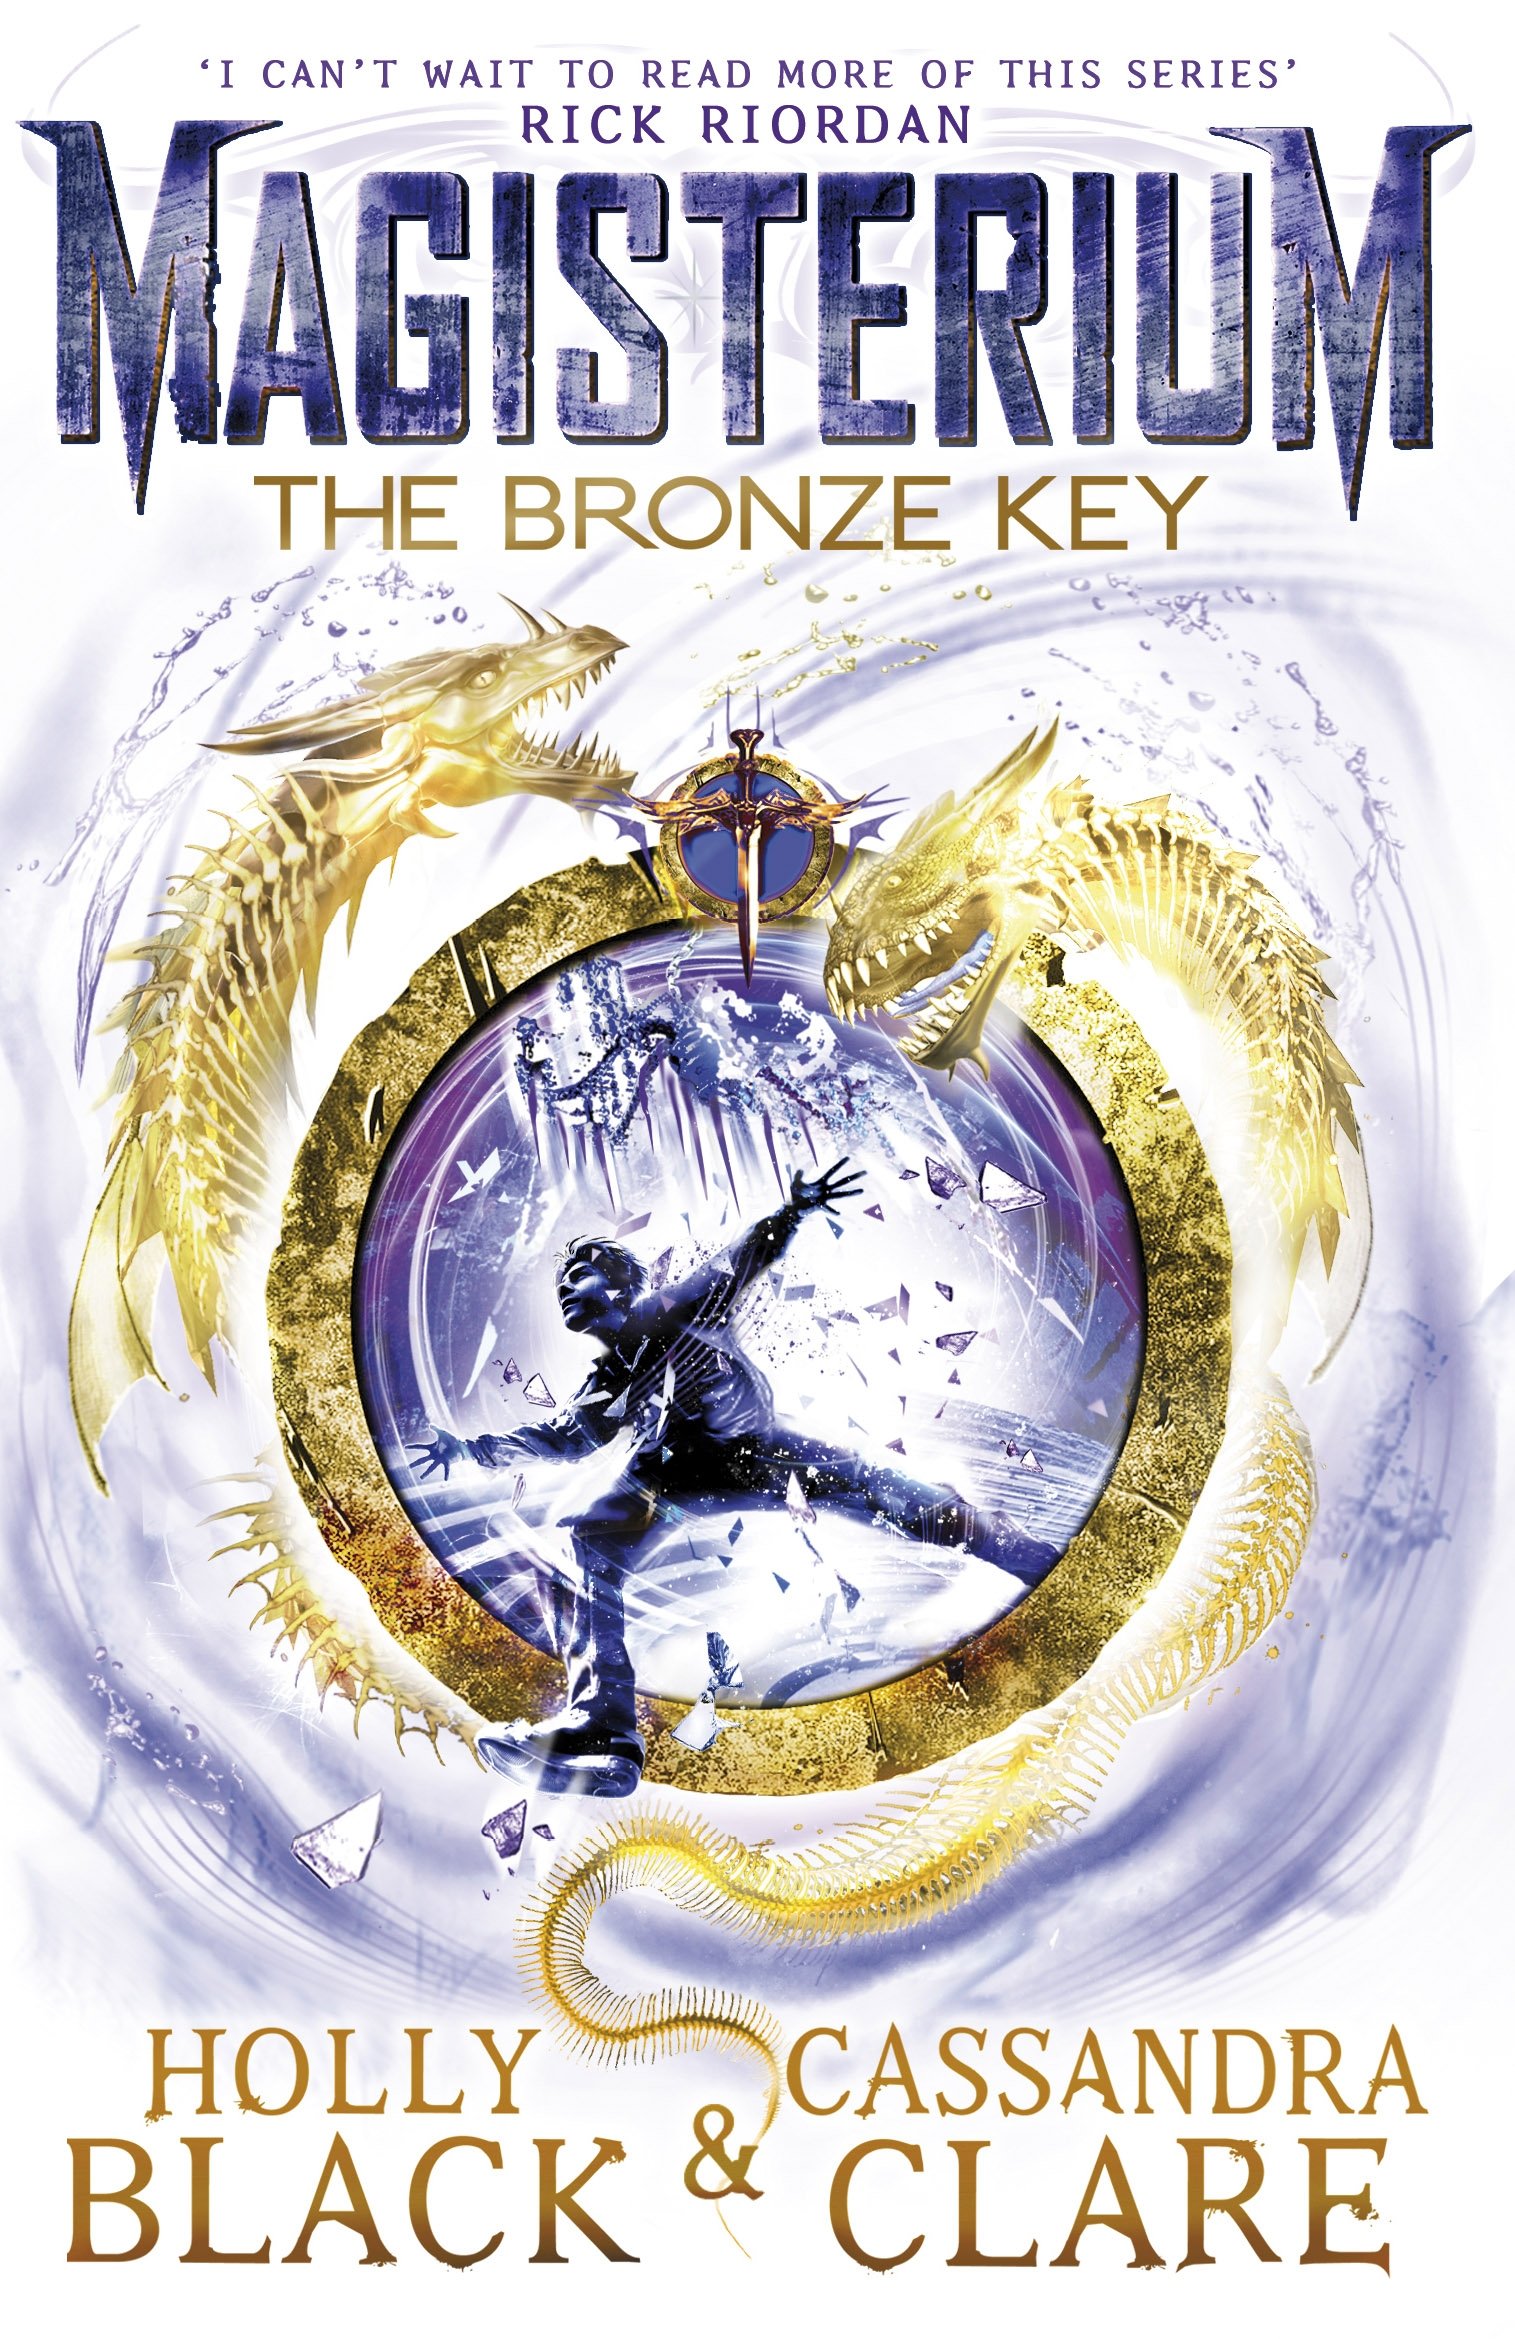 The Bronze Key by Holly Black